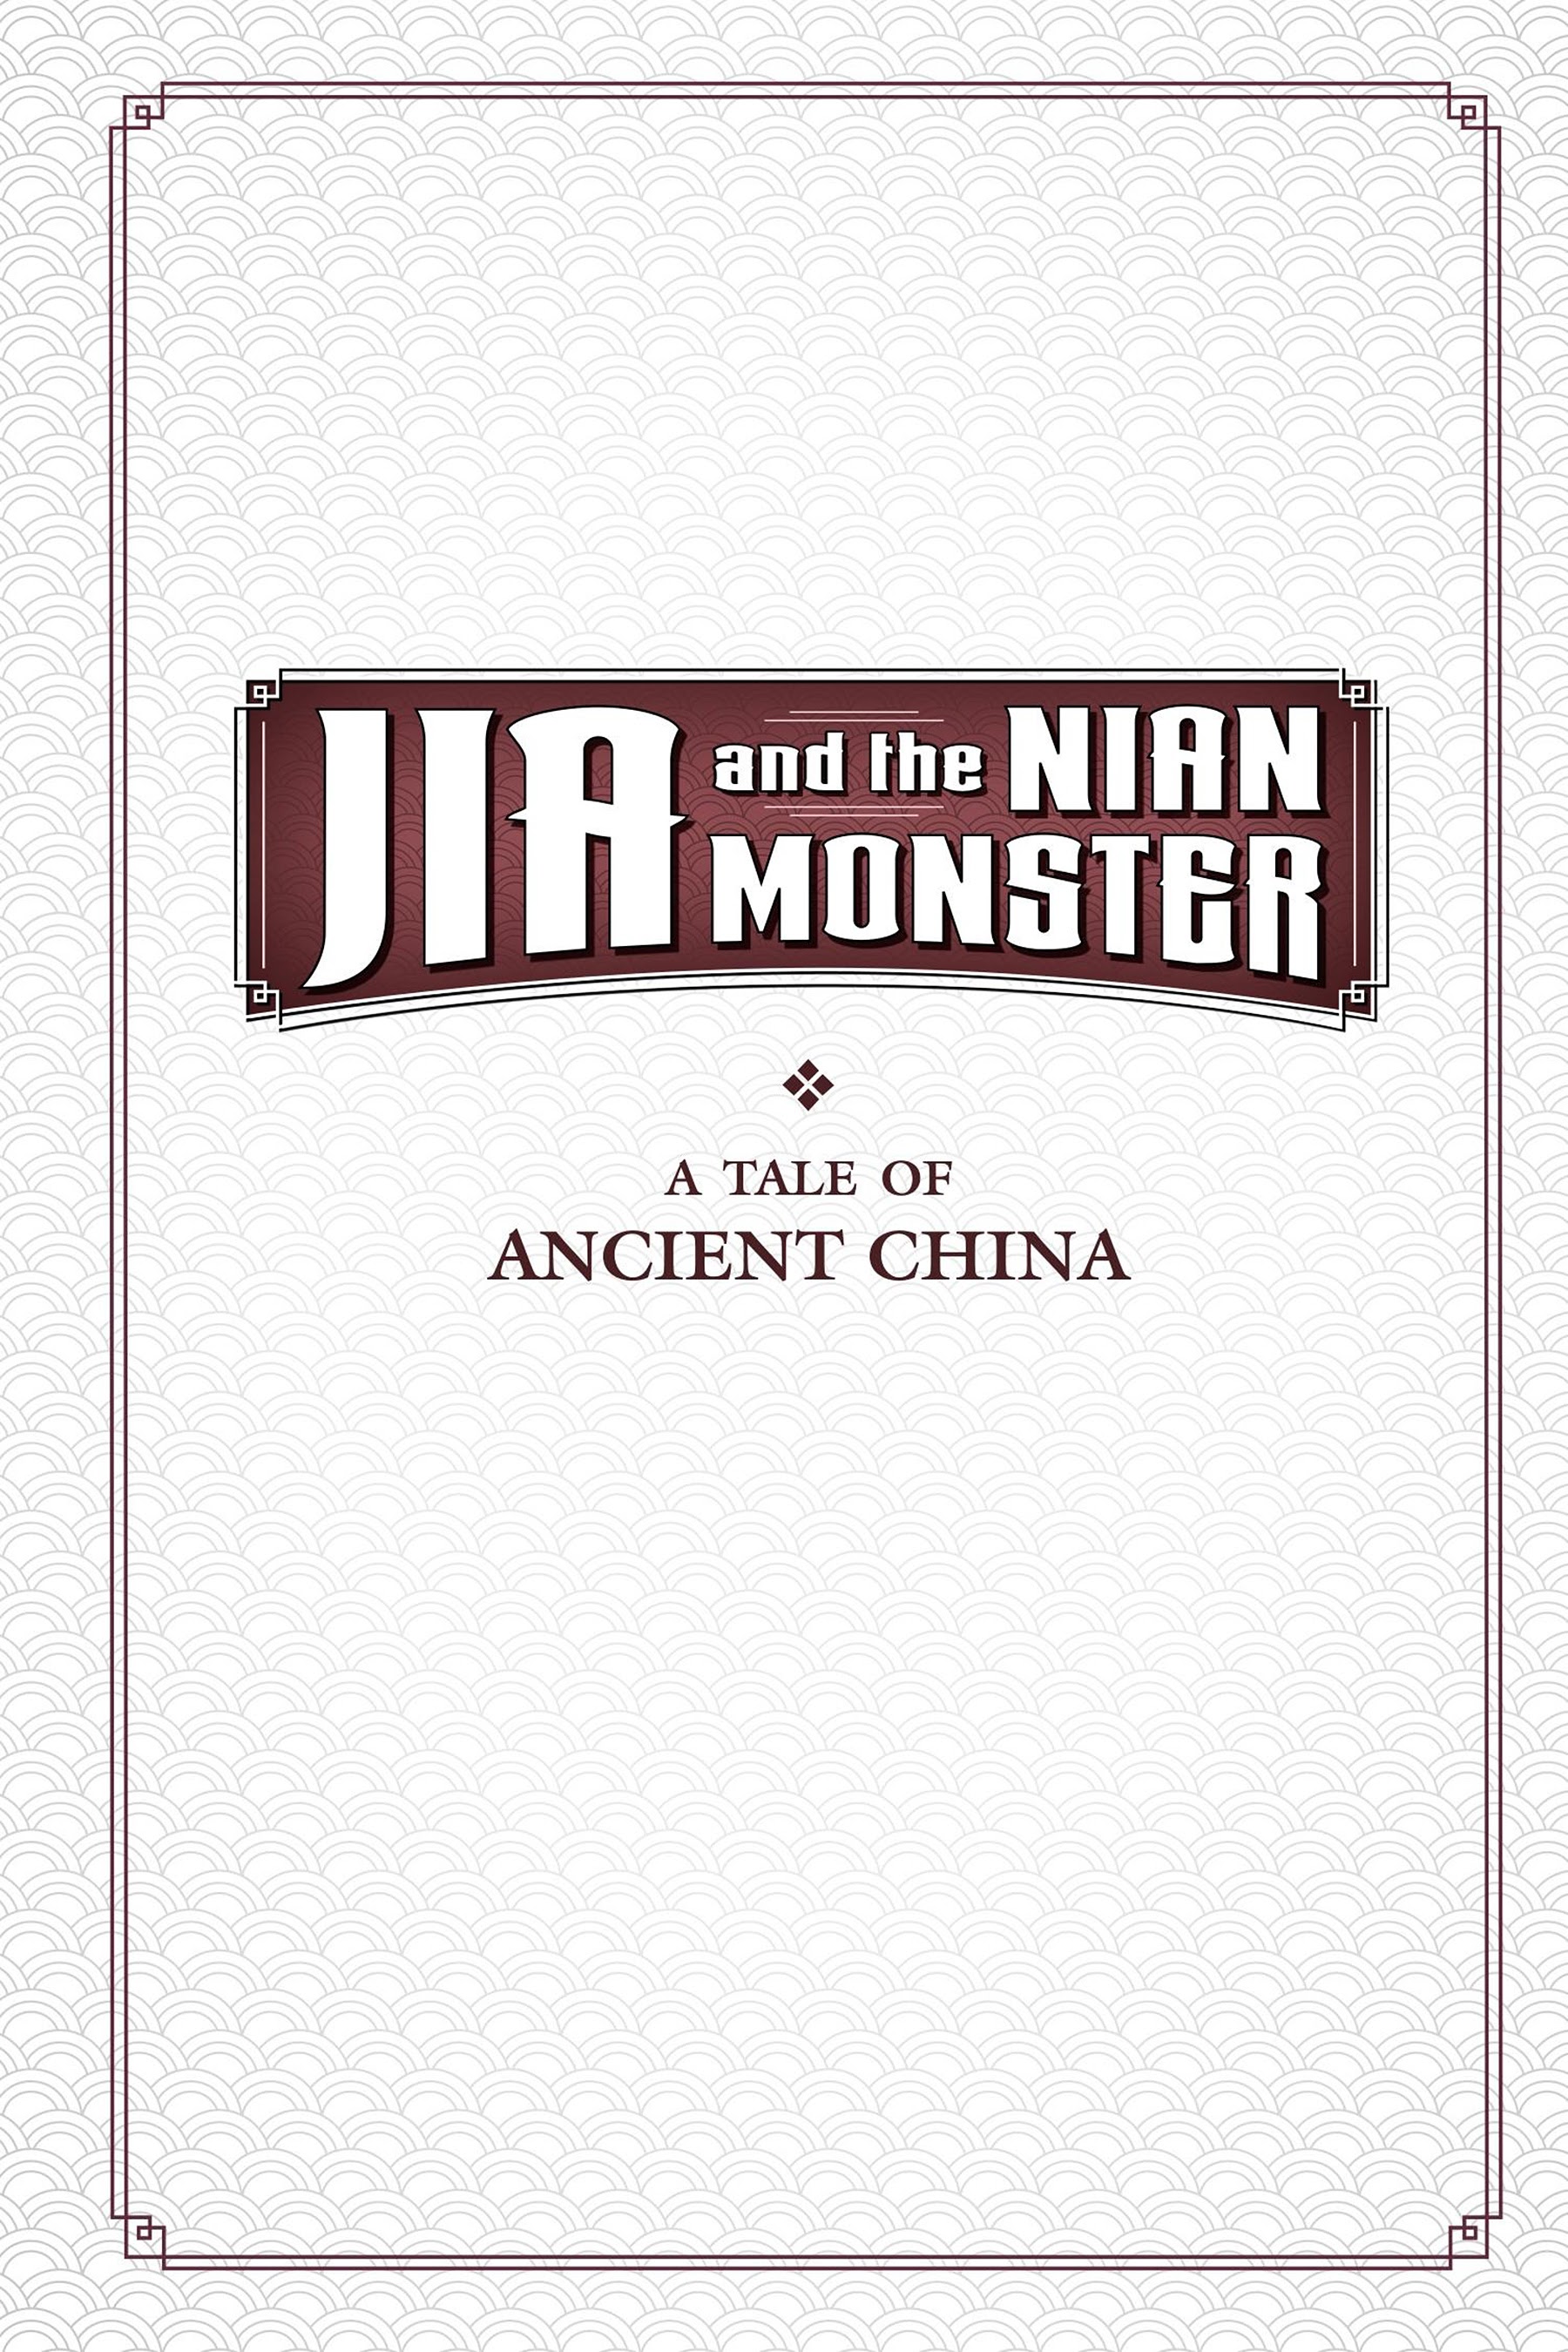 Read online Jia and the Nian Monster comic -  Issue # TPB - 3